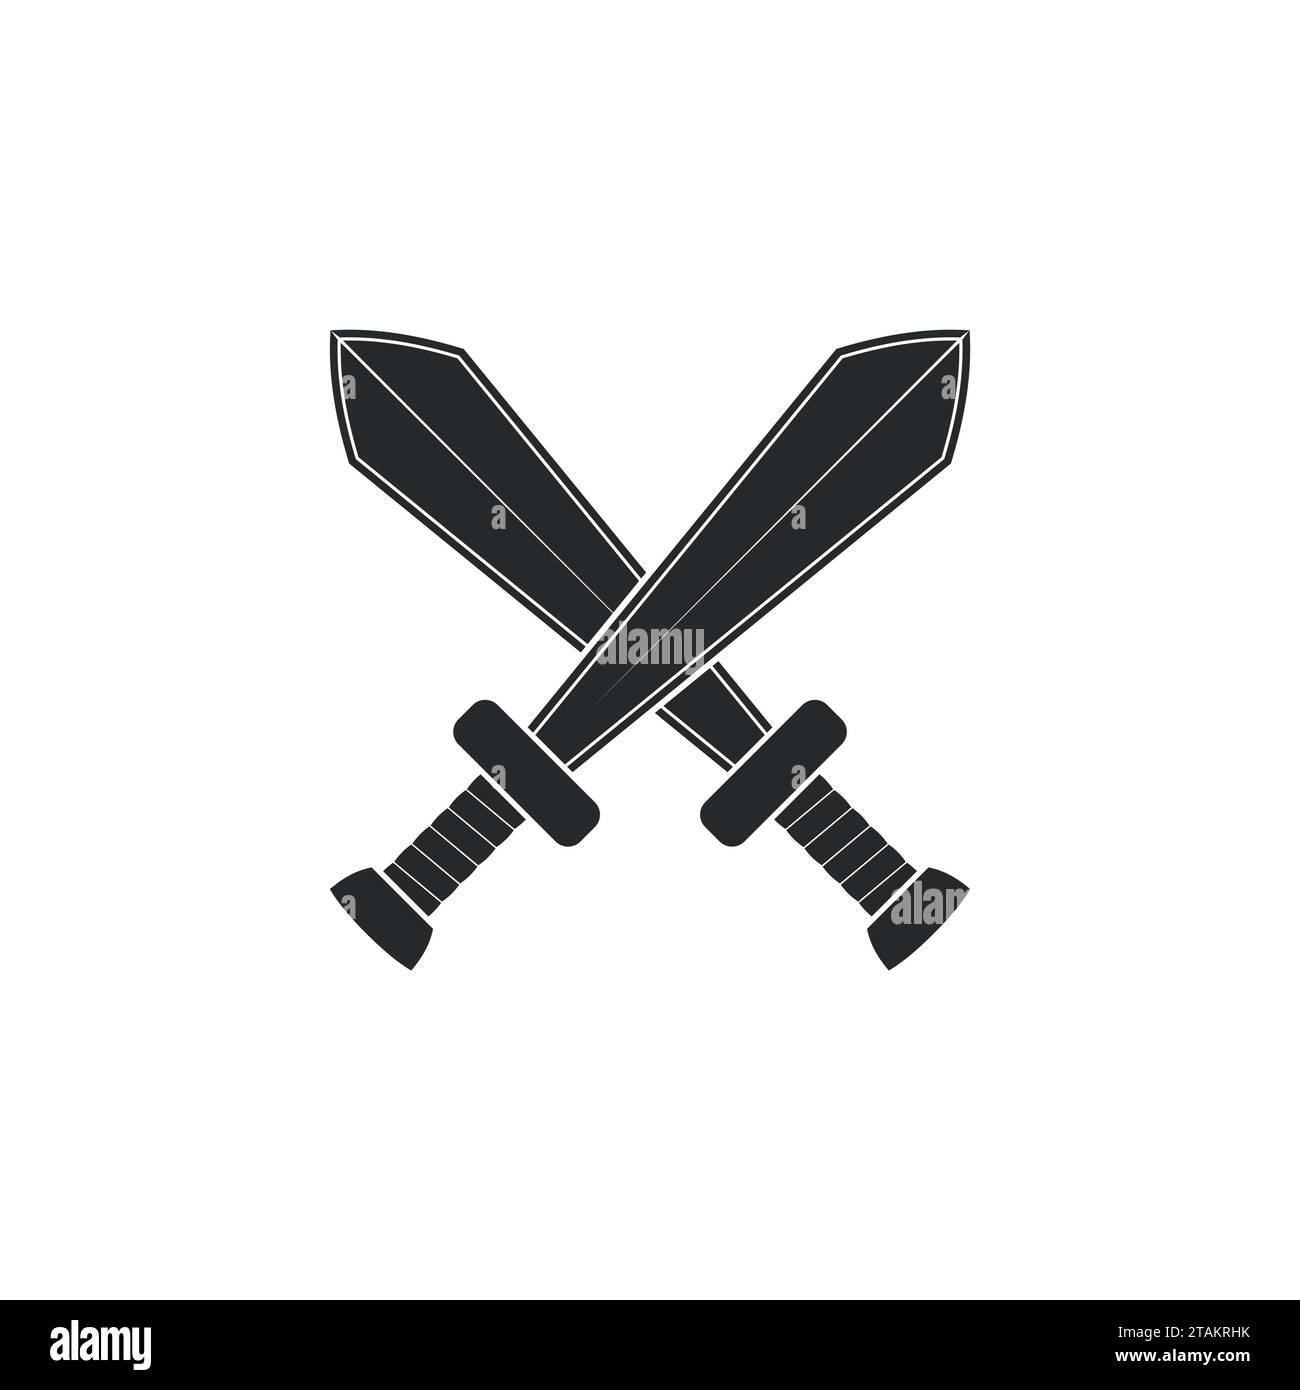 Crossed swords icon isolated on white background. Arms vector illustration Stock Vector